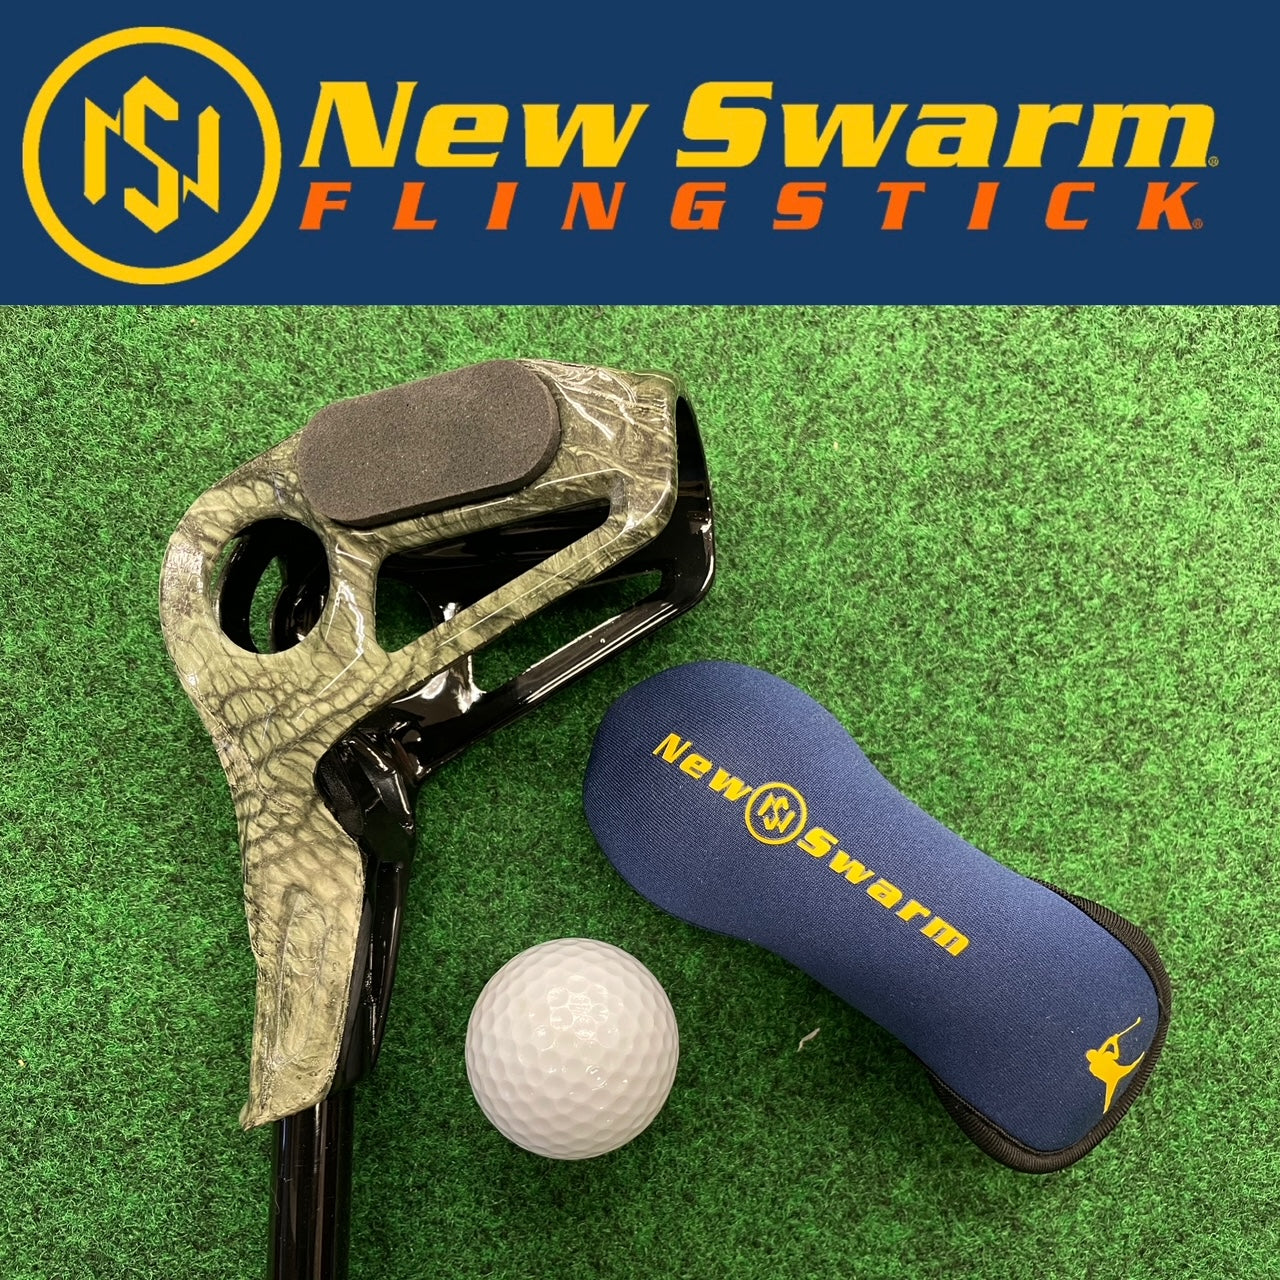 New Swarm introduces the Lizard King, its latest FlingStick release for the 2021 season